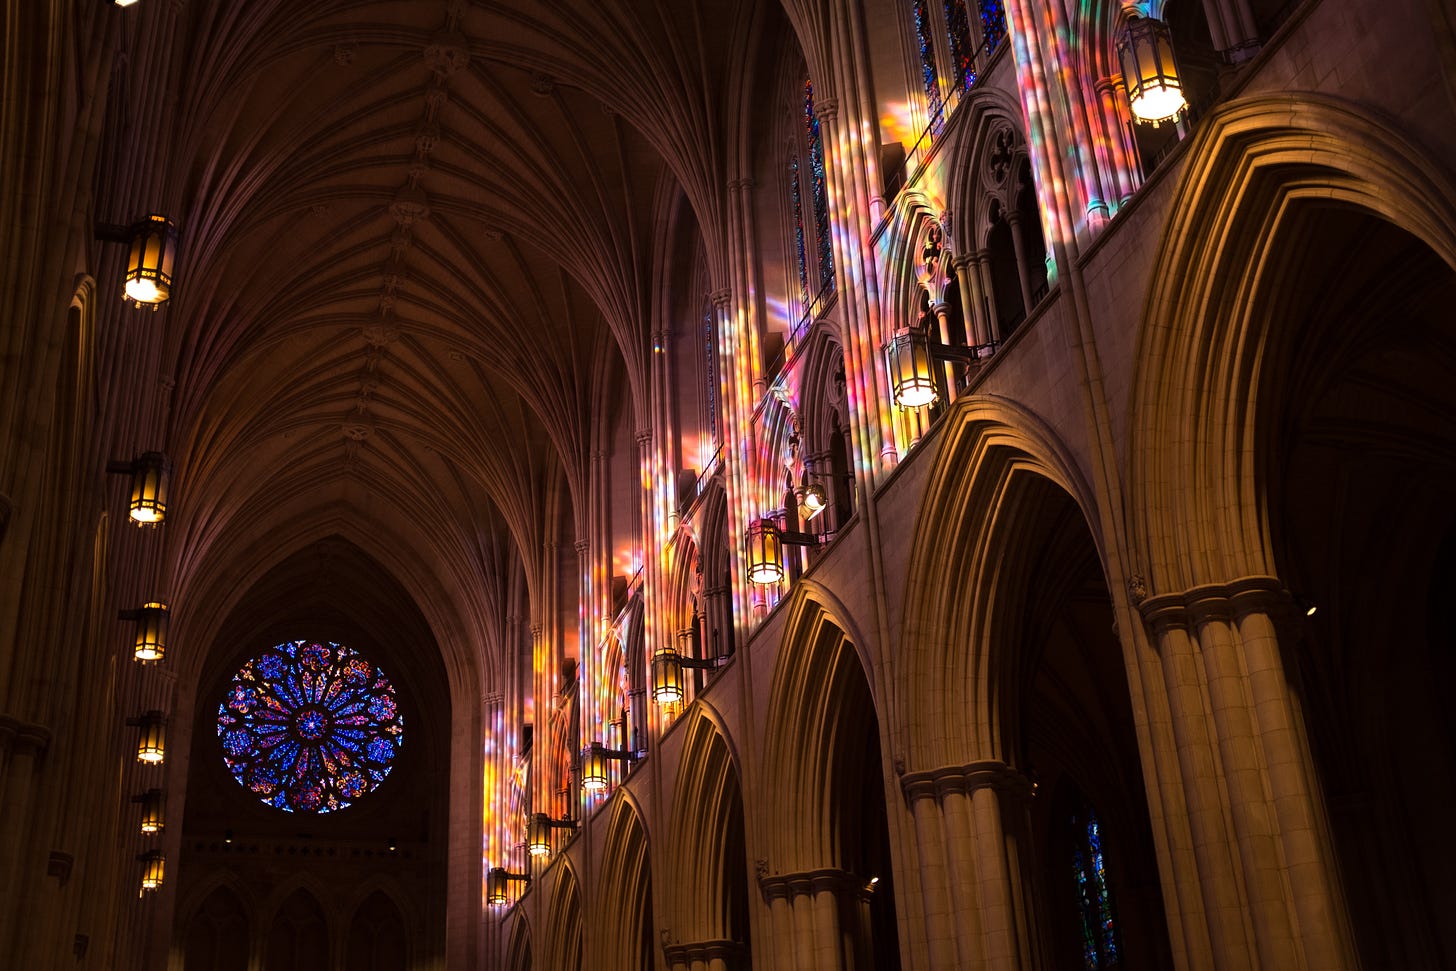 Arches and rose window at the National Cathedral (Washington, D.C.).